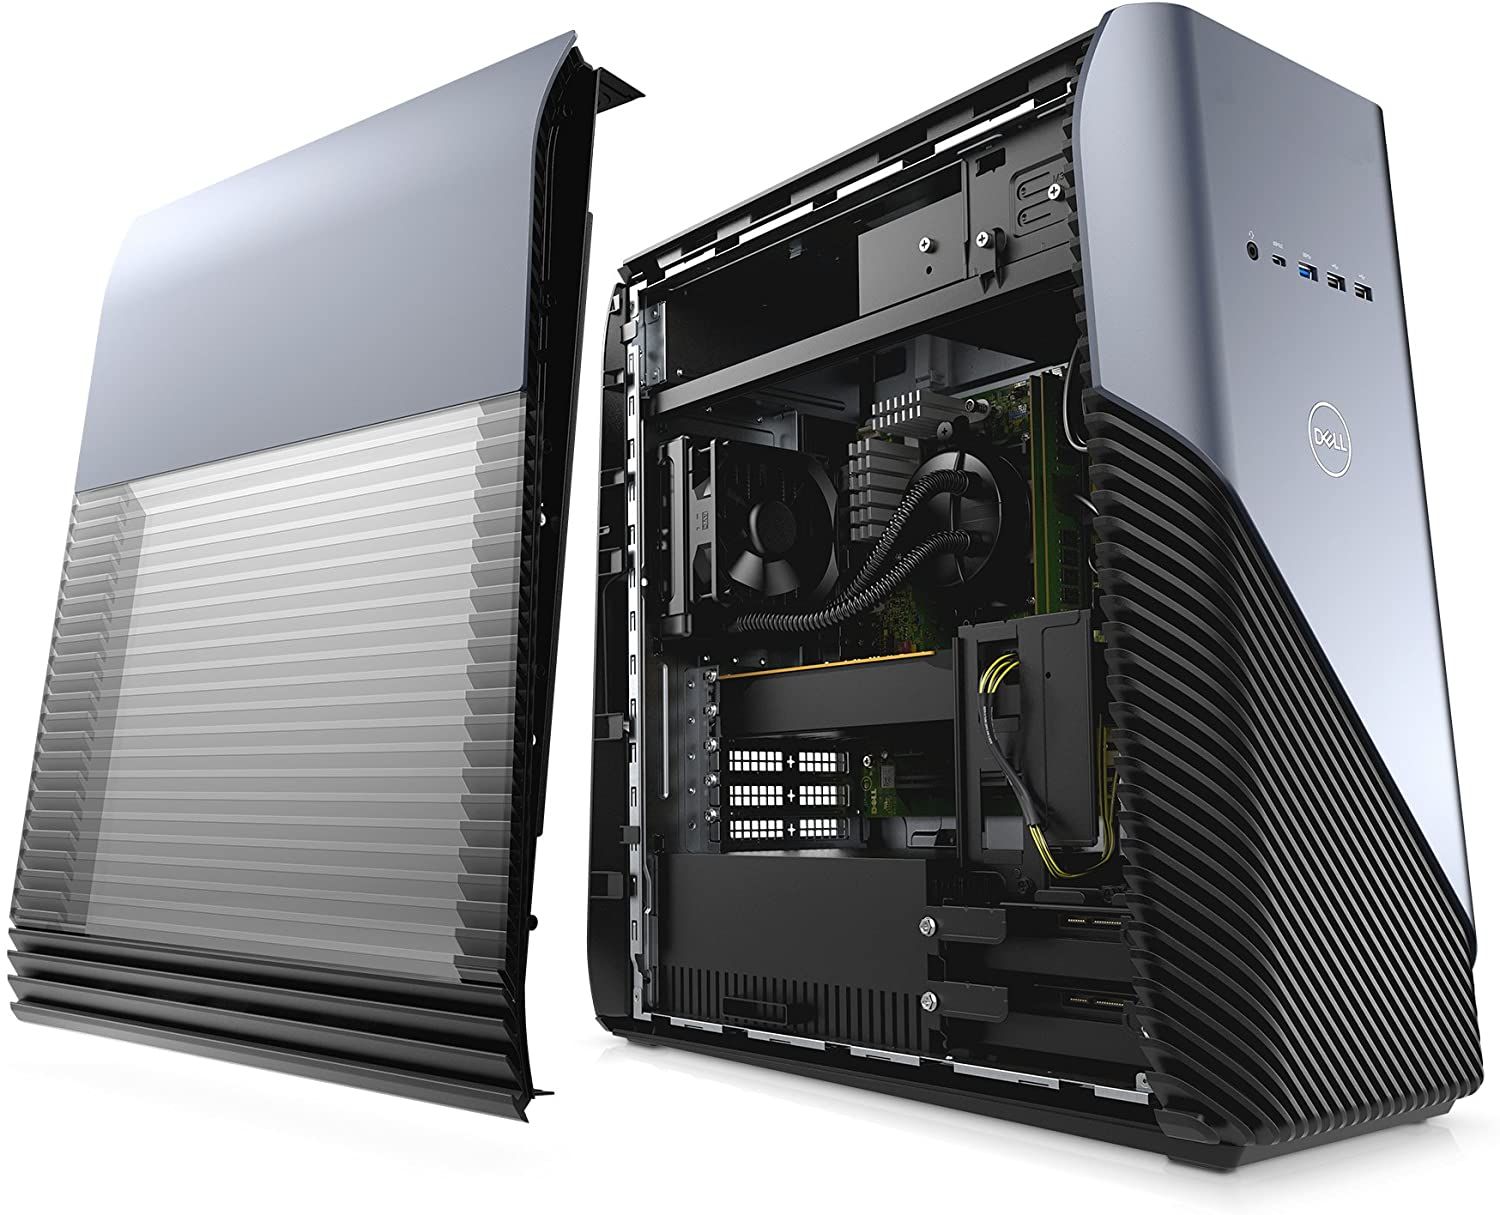 Best gaming PC